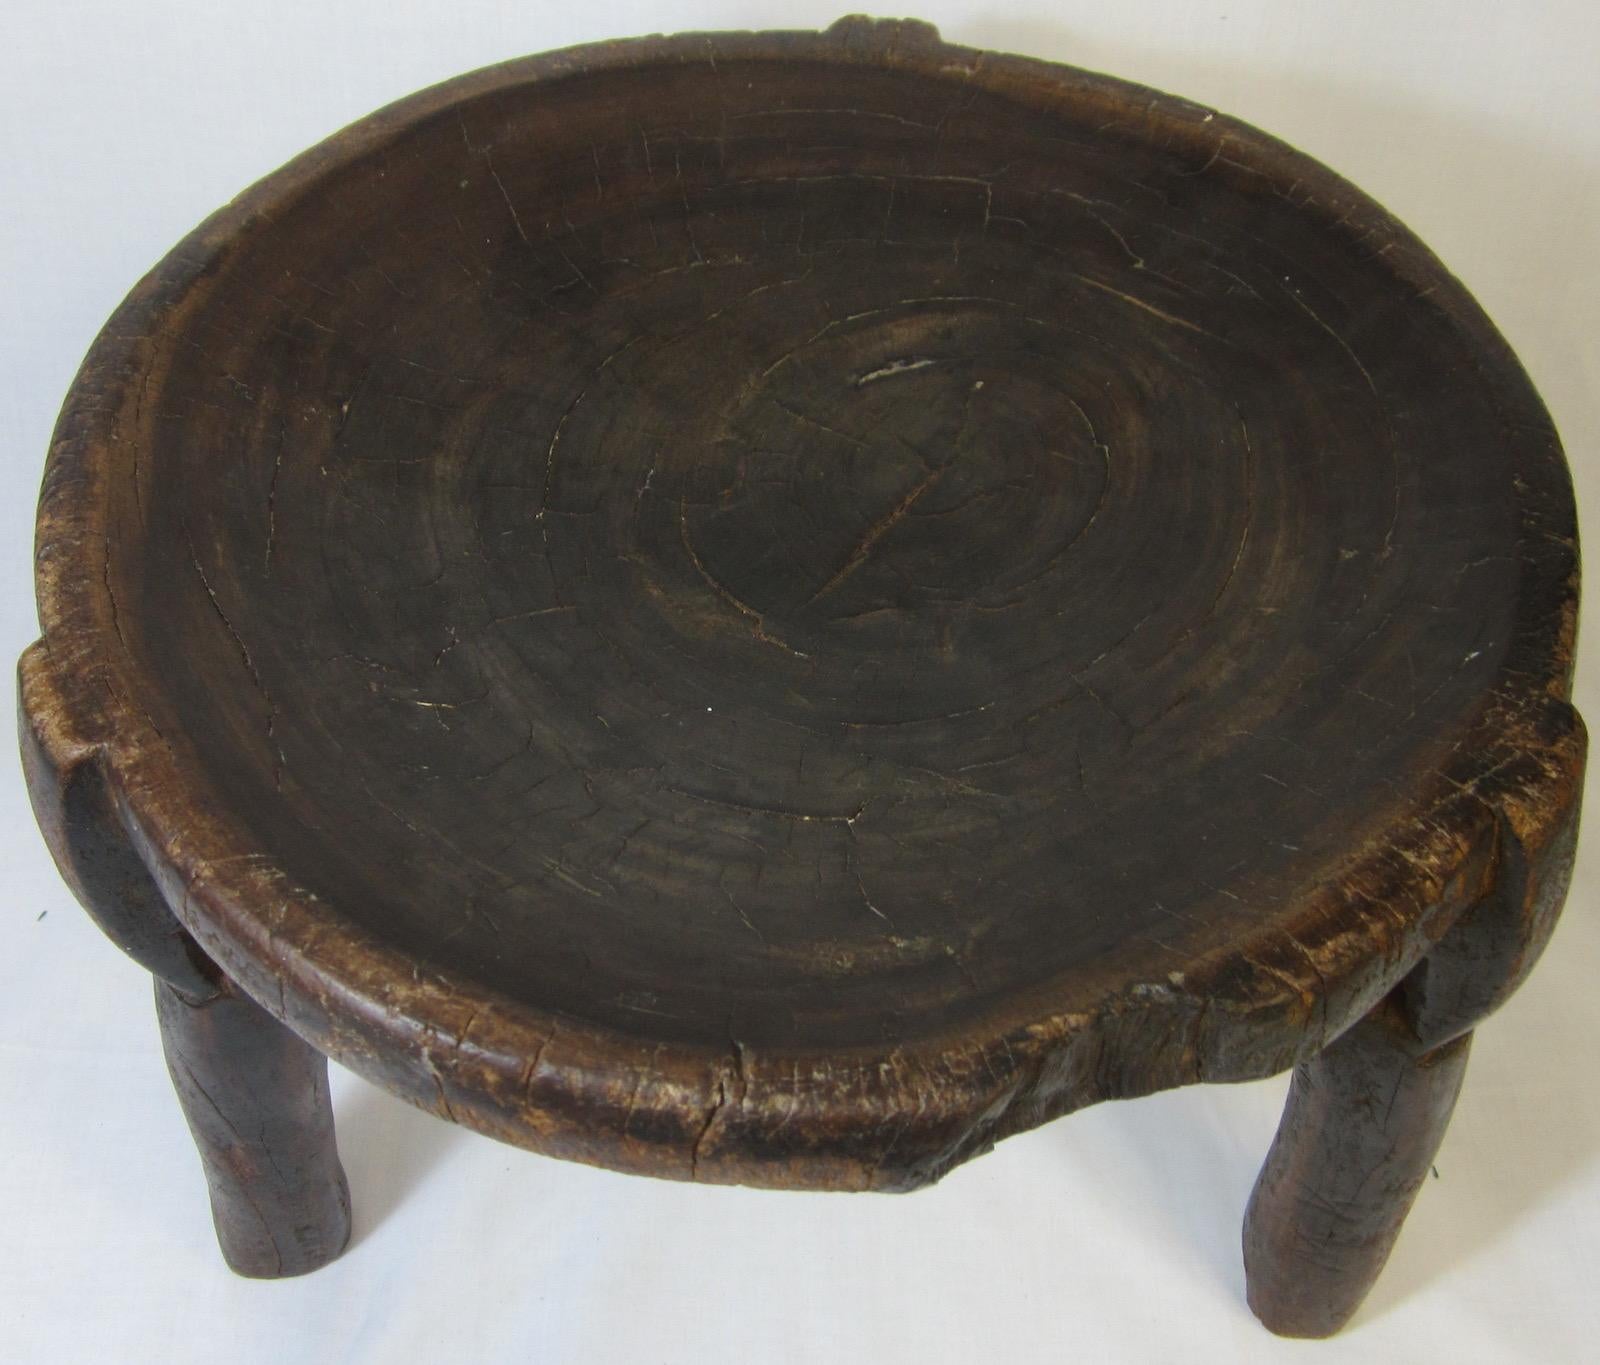 Early 20th century carved wood Tanzanian HEHE stool.